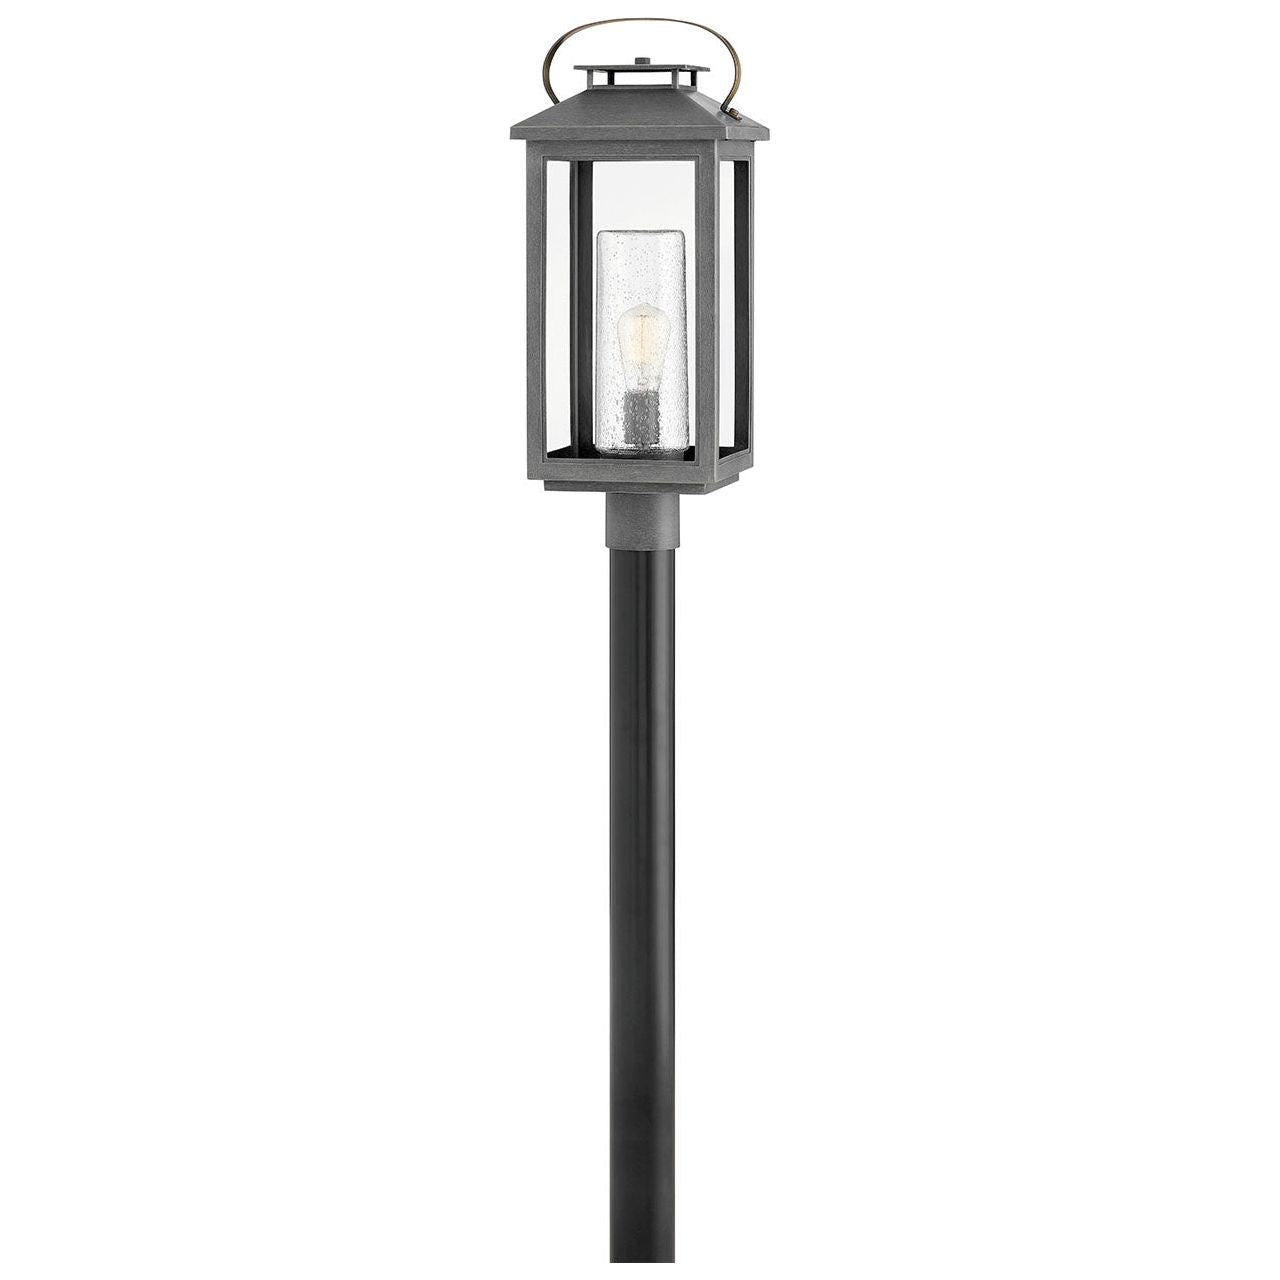 Hinkley Canada - 1161AH-LV - LED Post Top or Pier Mount Lantern - Atwater - Ash Bronze